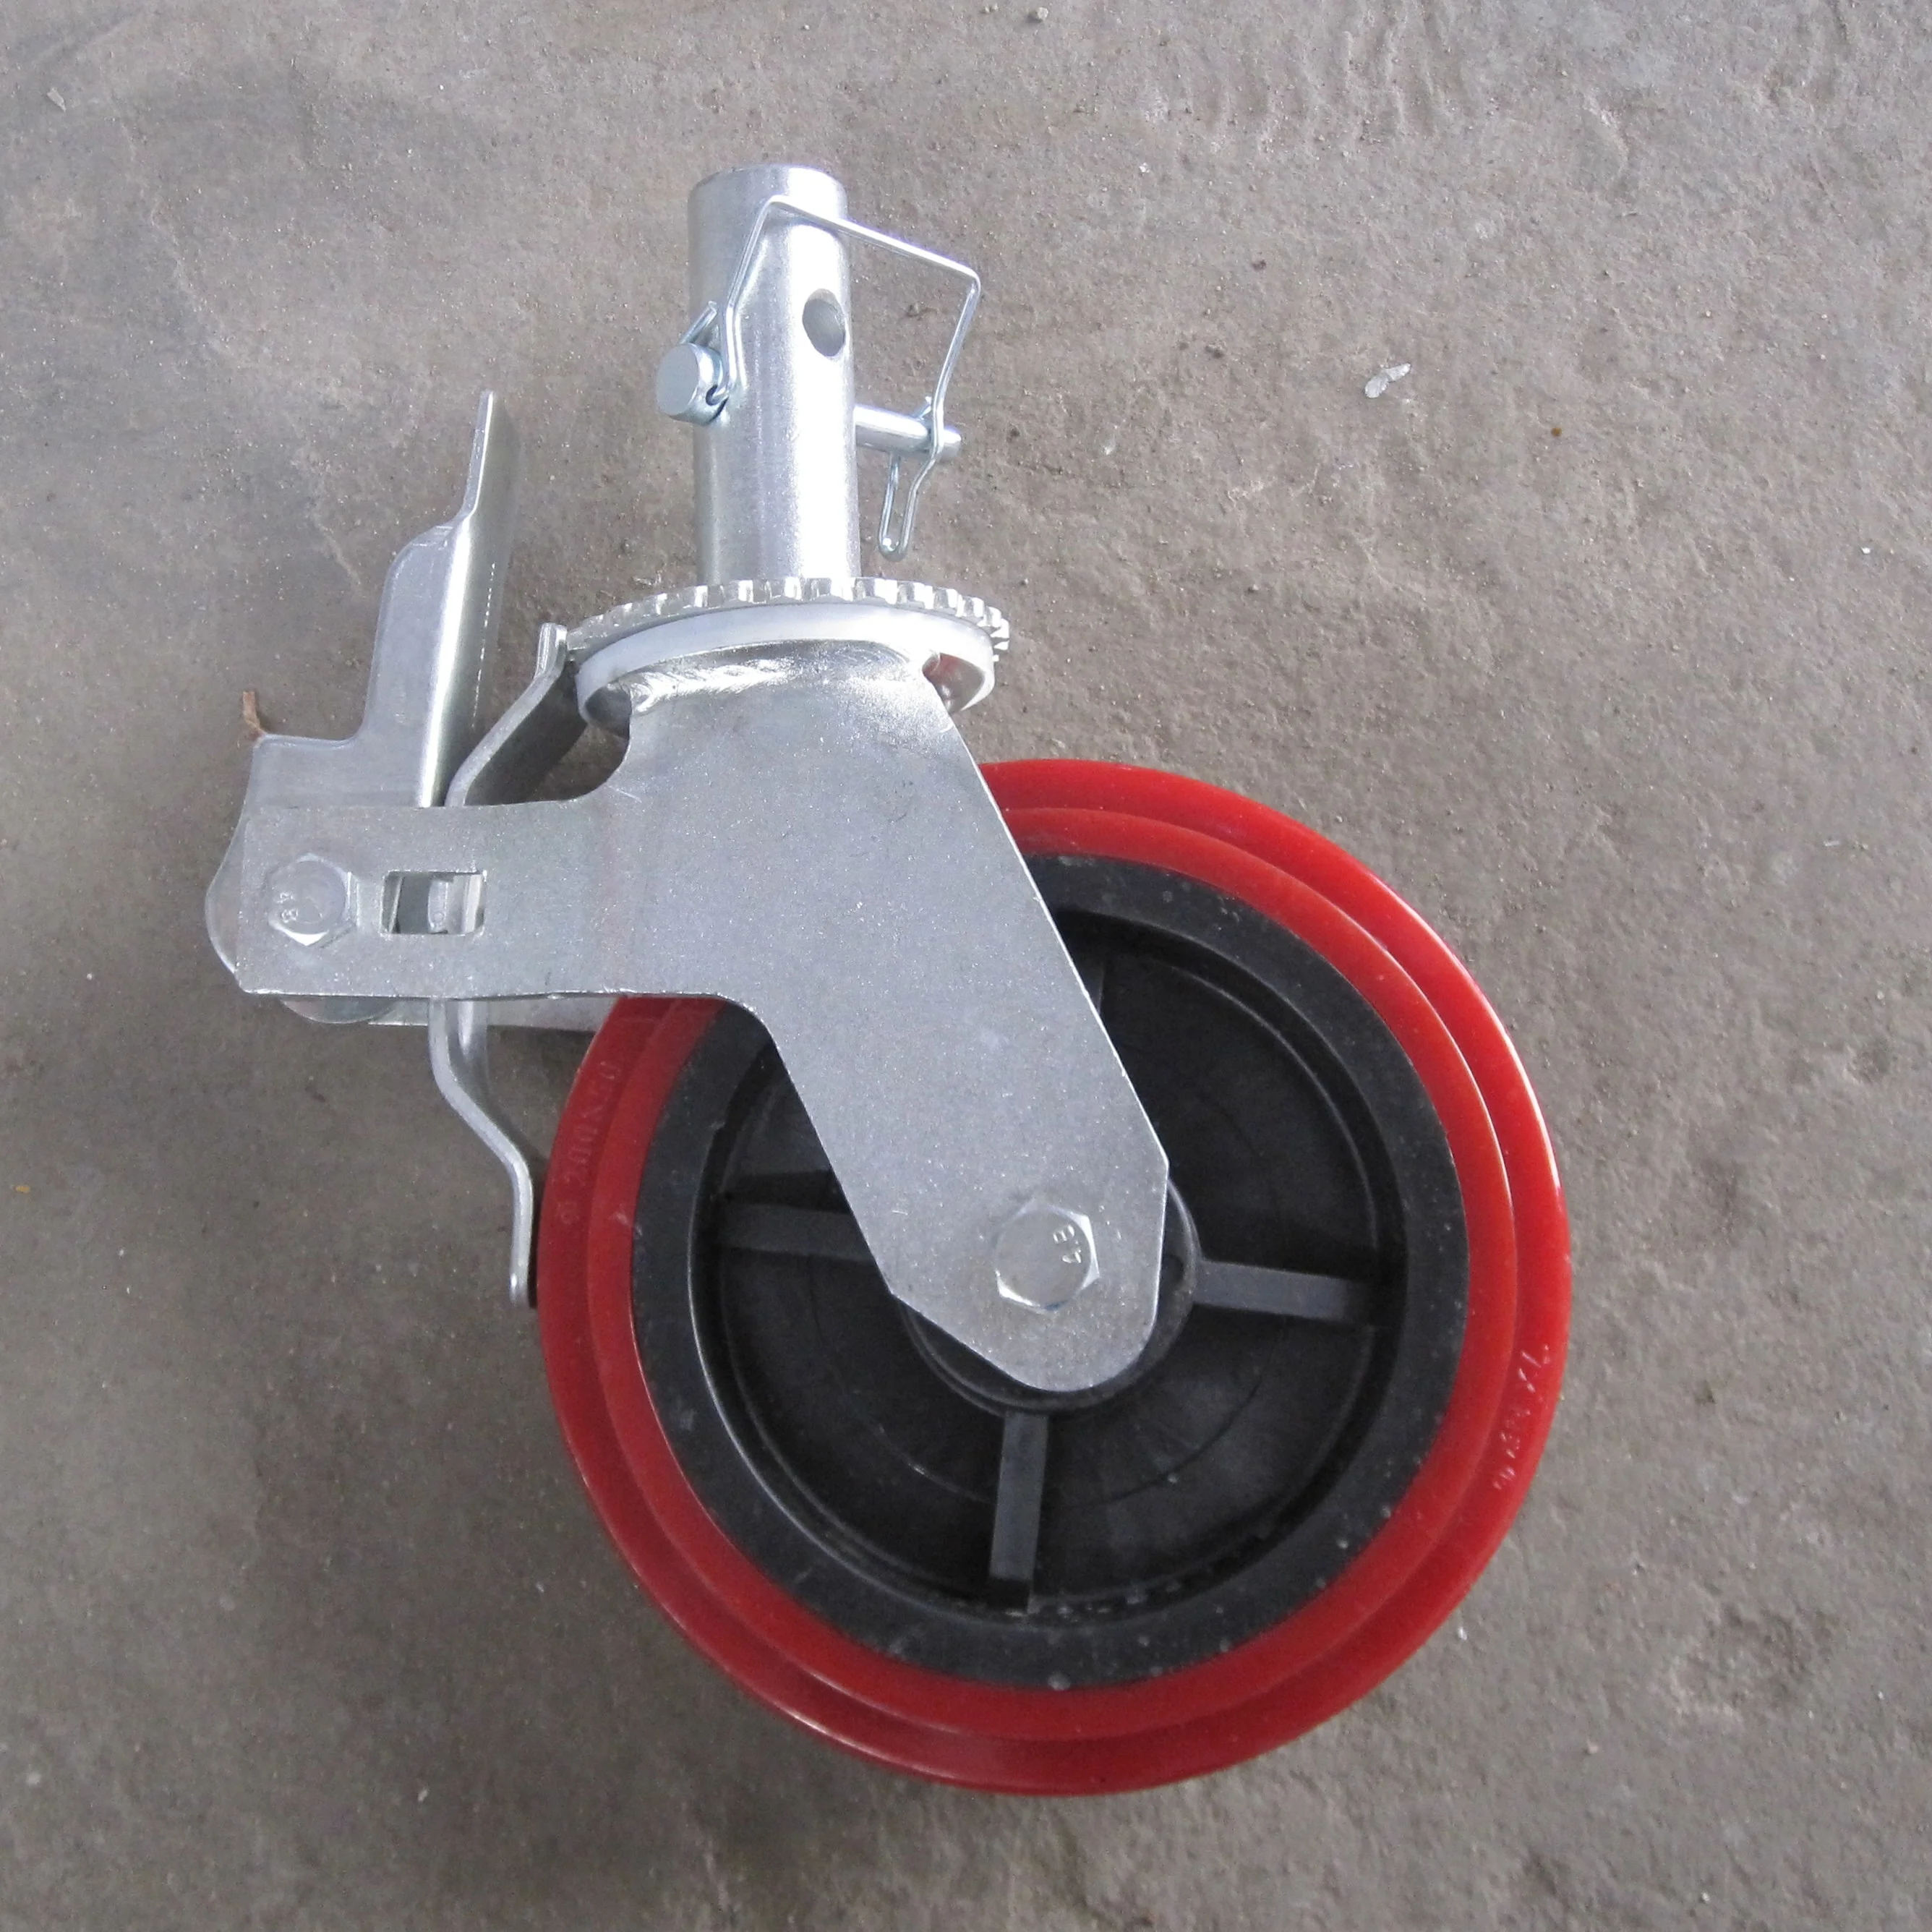 5 6 8 10 12 inch light and heavy duty industry rubber wheel for mobile adjustable with brake scaffold wheel caster